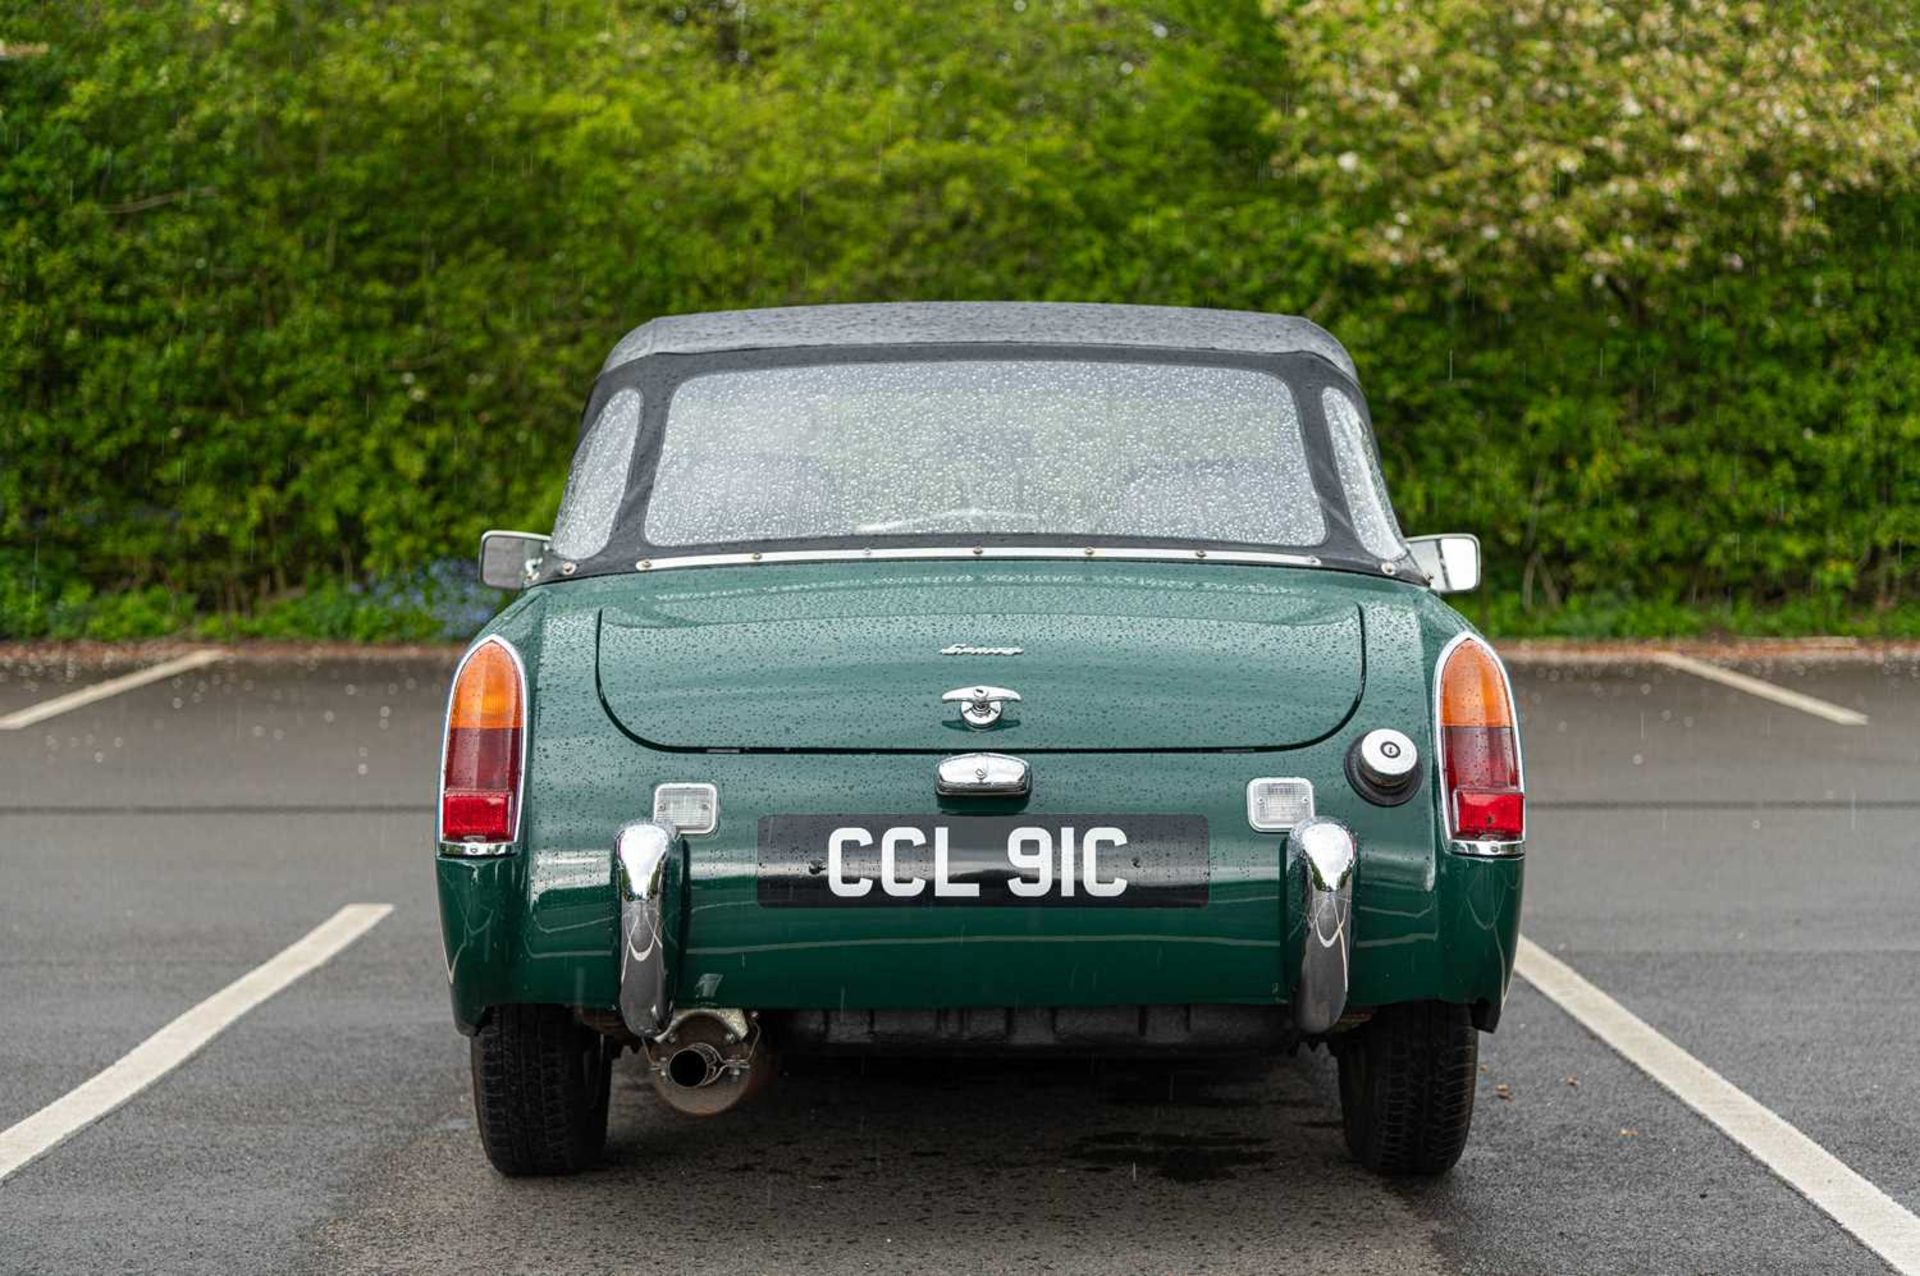 1965 Austin-Healey Sprite Formerly the property of British Formula One racing driver David Piper - Image 20 of 71